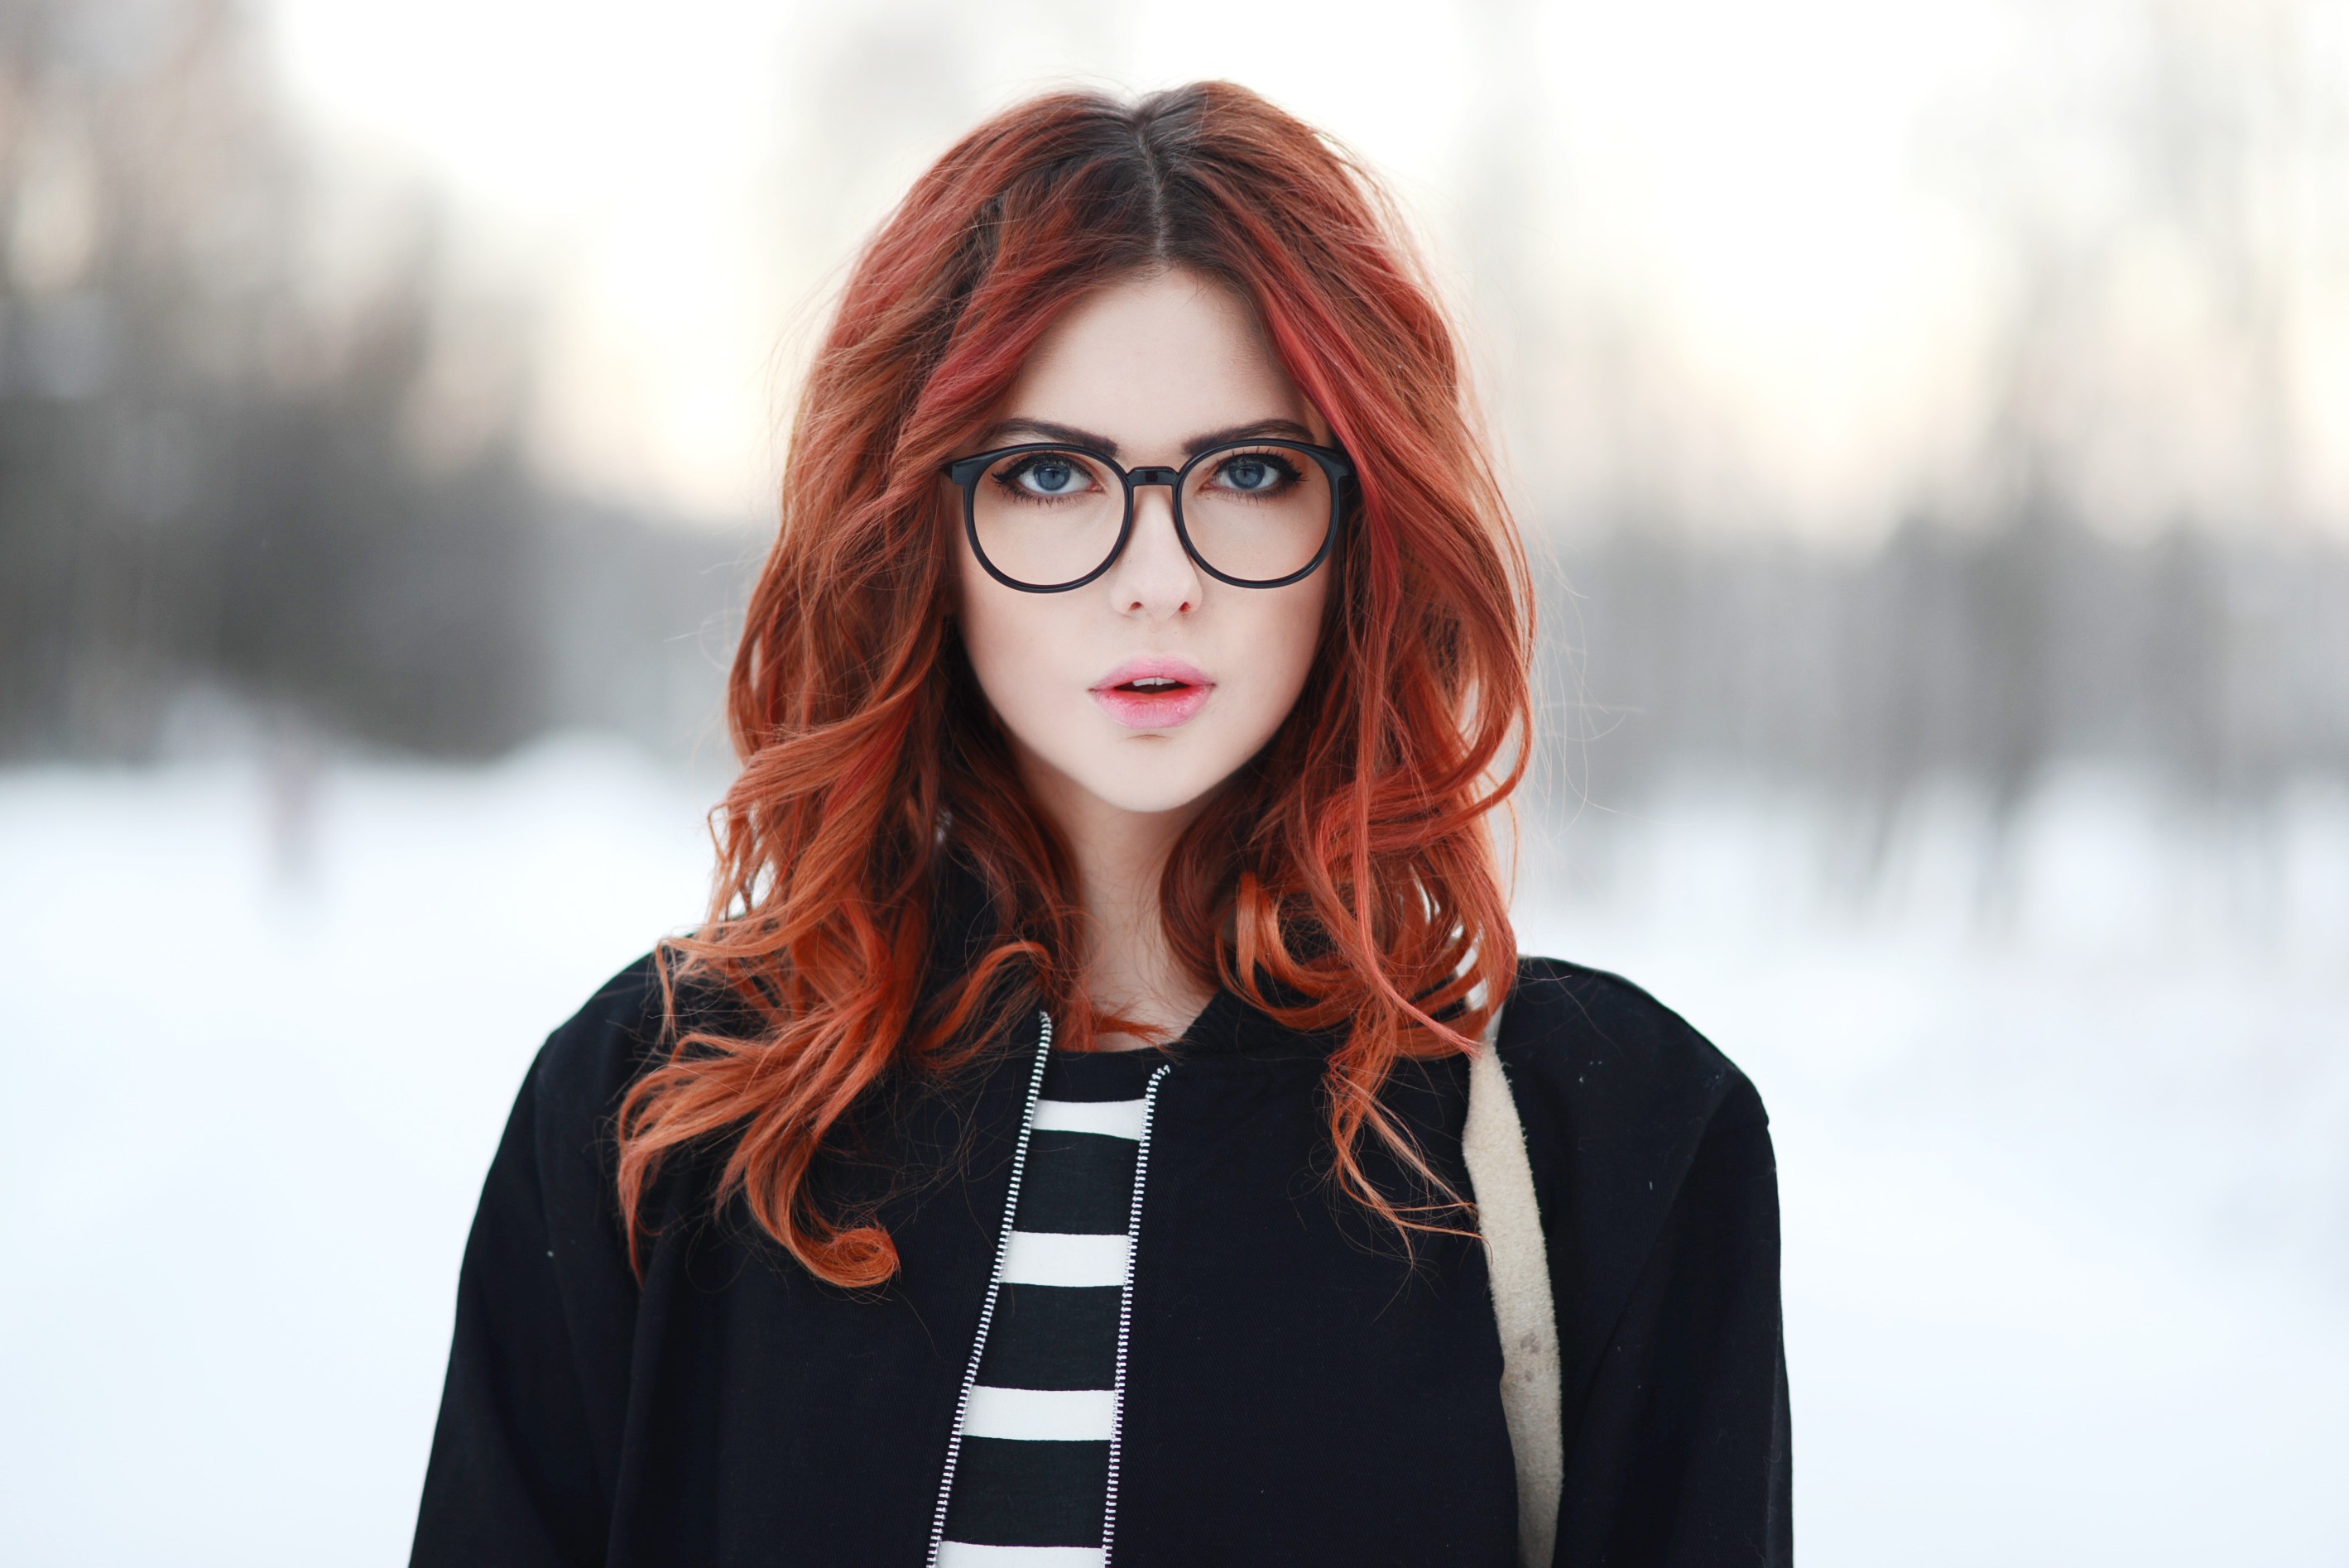 Wallpaper : face, long hair, women with glasses, wooden 